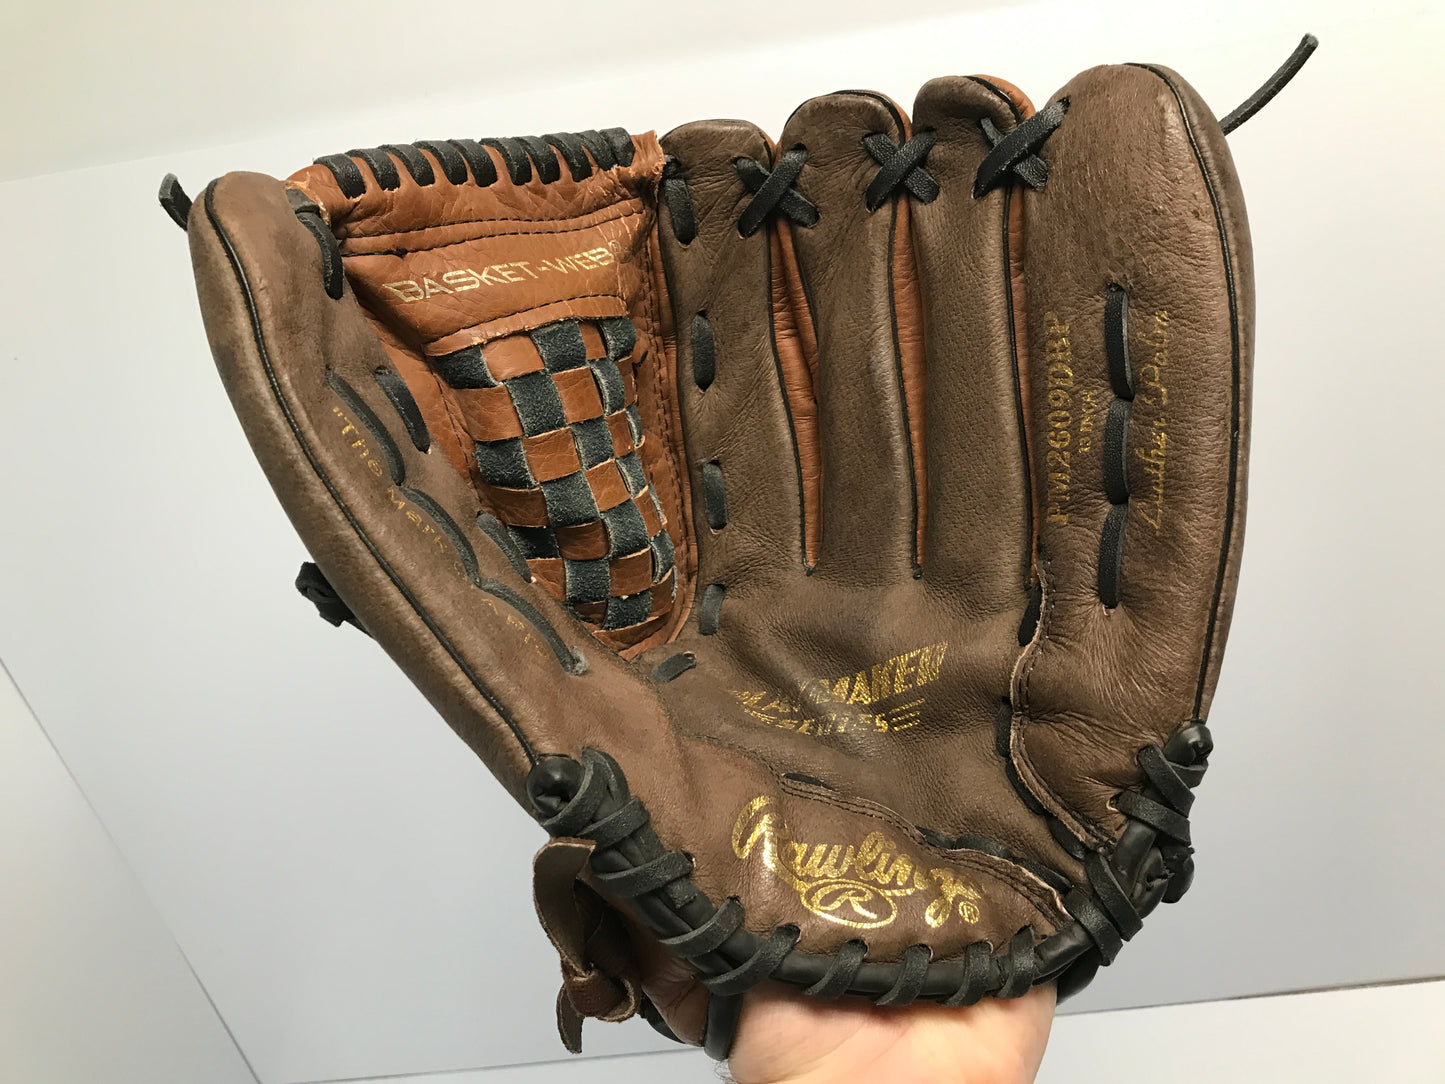 Baseball Glove 12.5 inch Rawlings Black Brown Leather Fits Left Hand